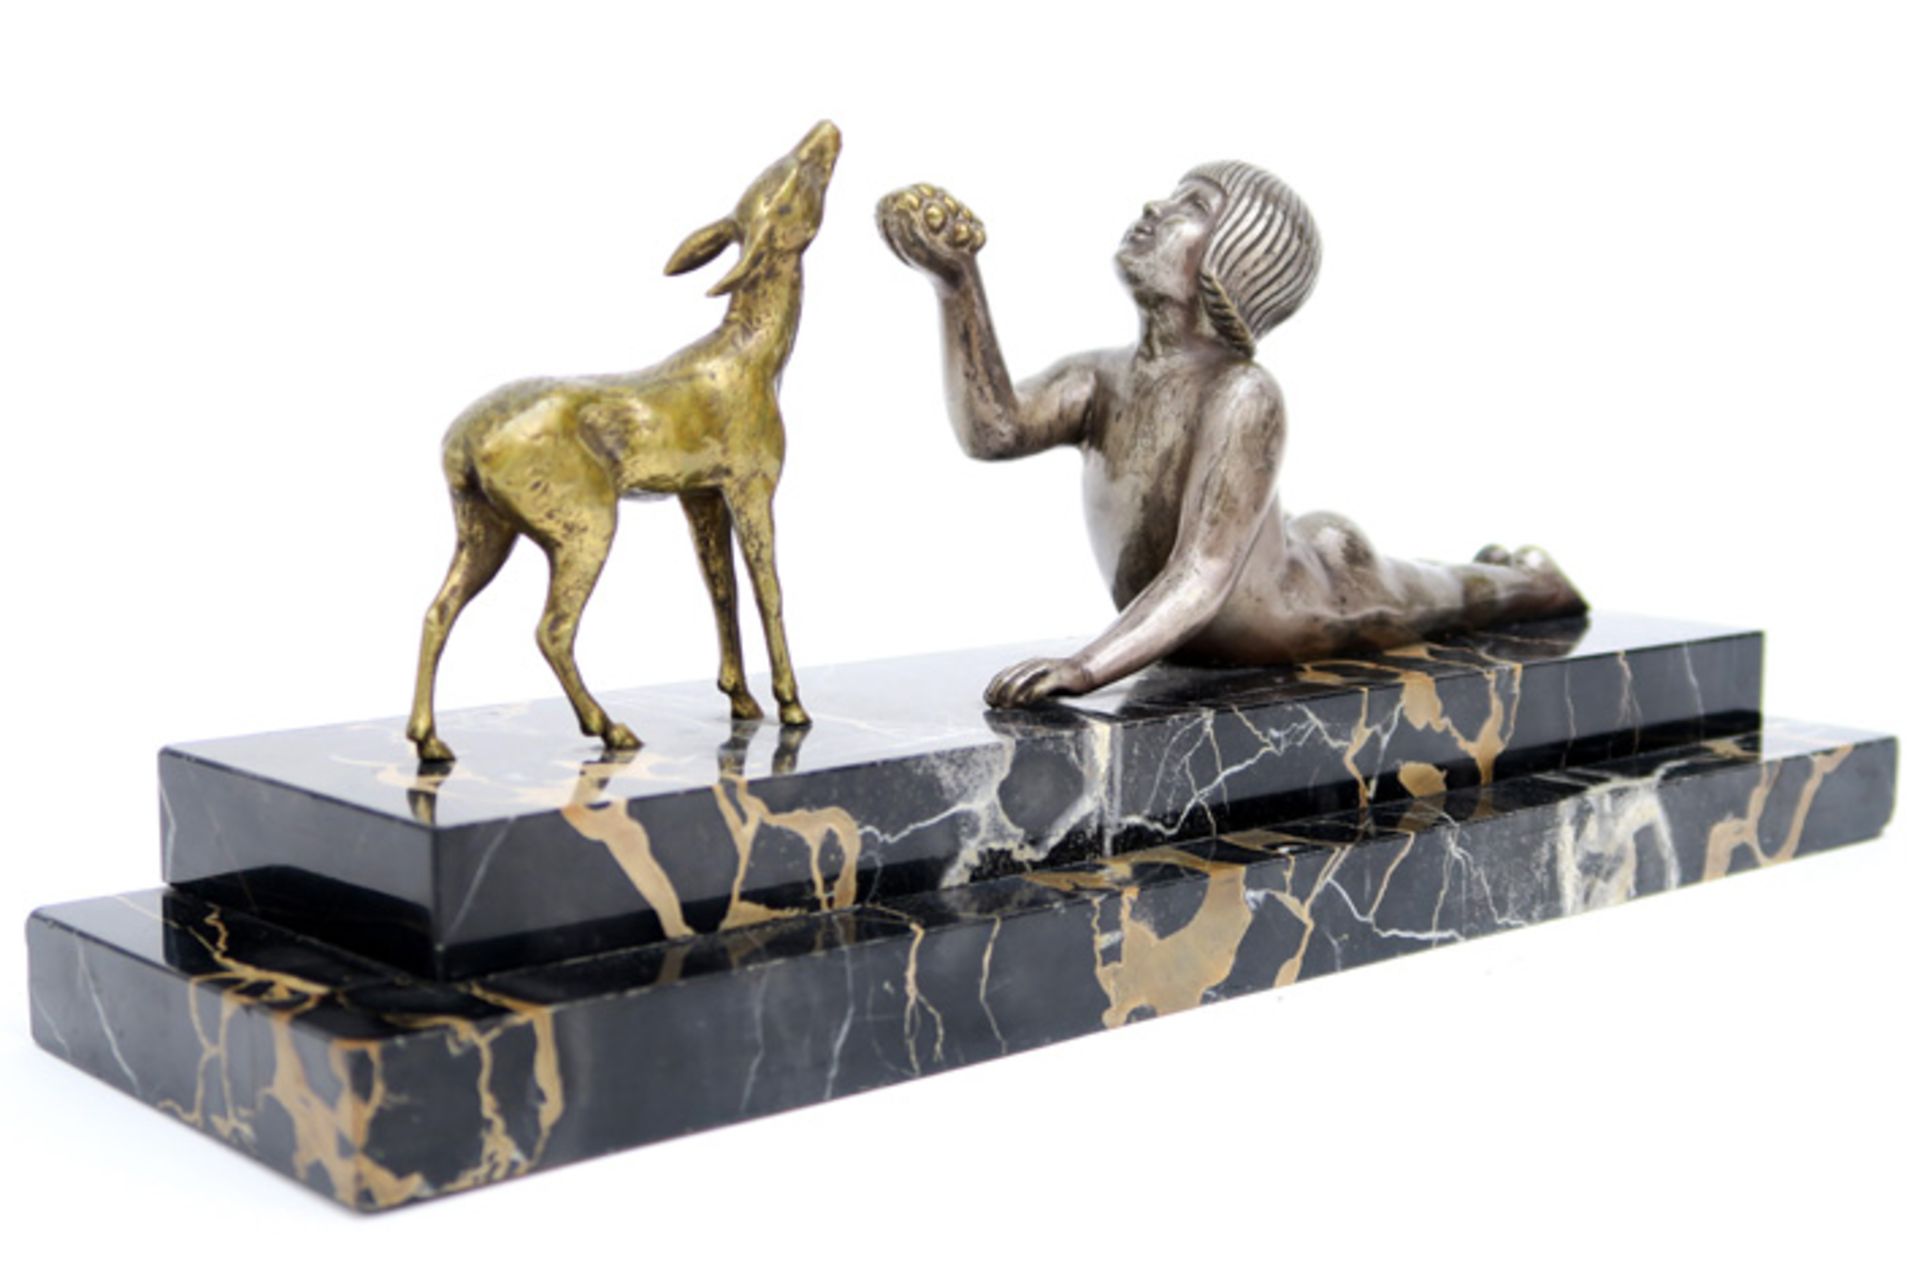 Zoltan Kovats signed double sculpture in bronze on a base in typical marble also with a "Editions - Bild 2 aus 5